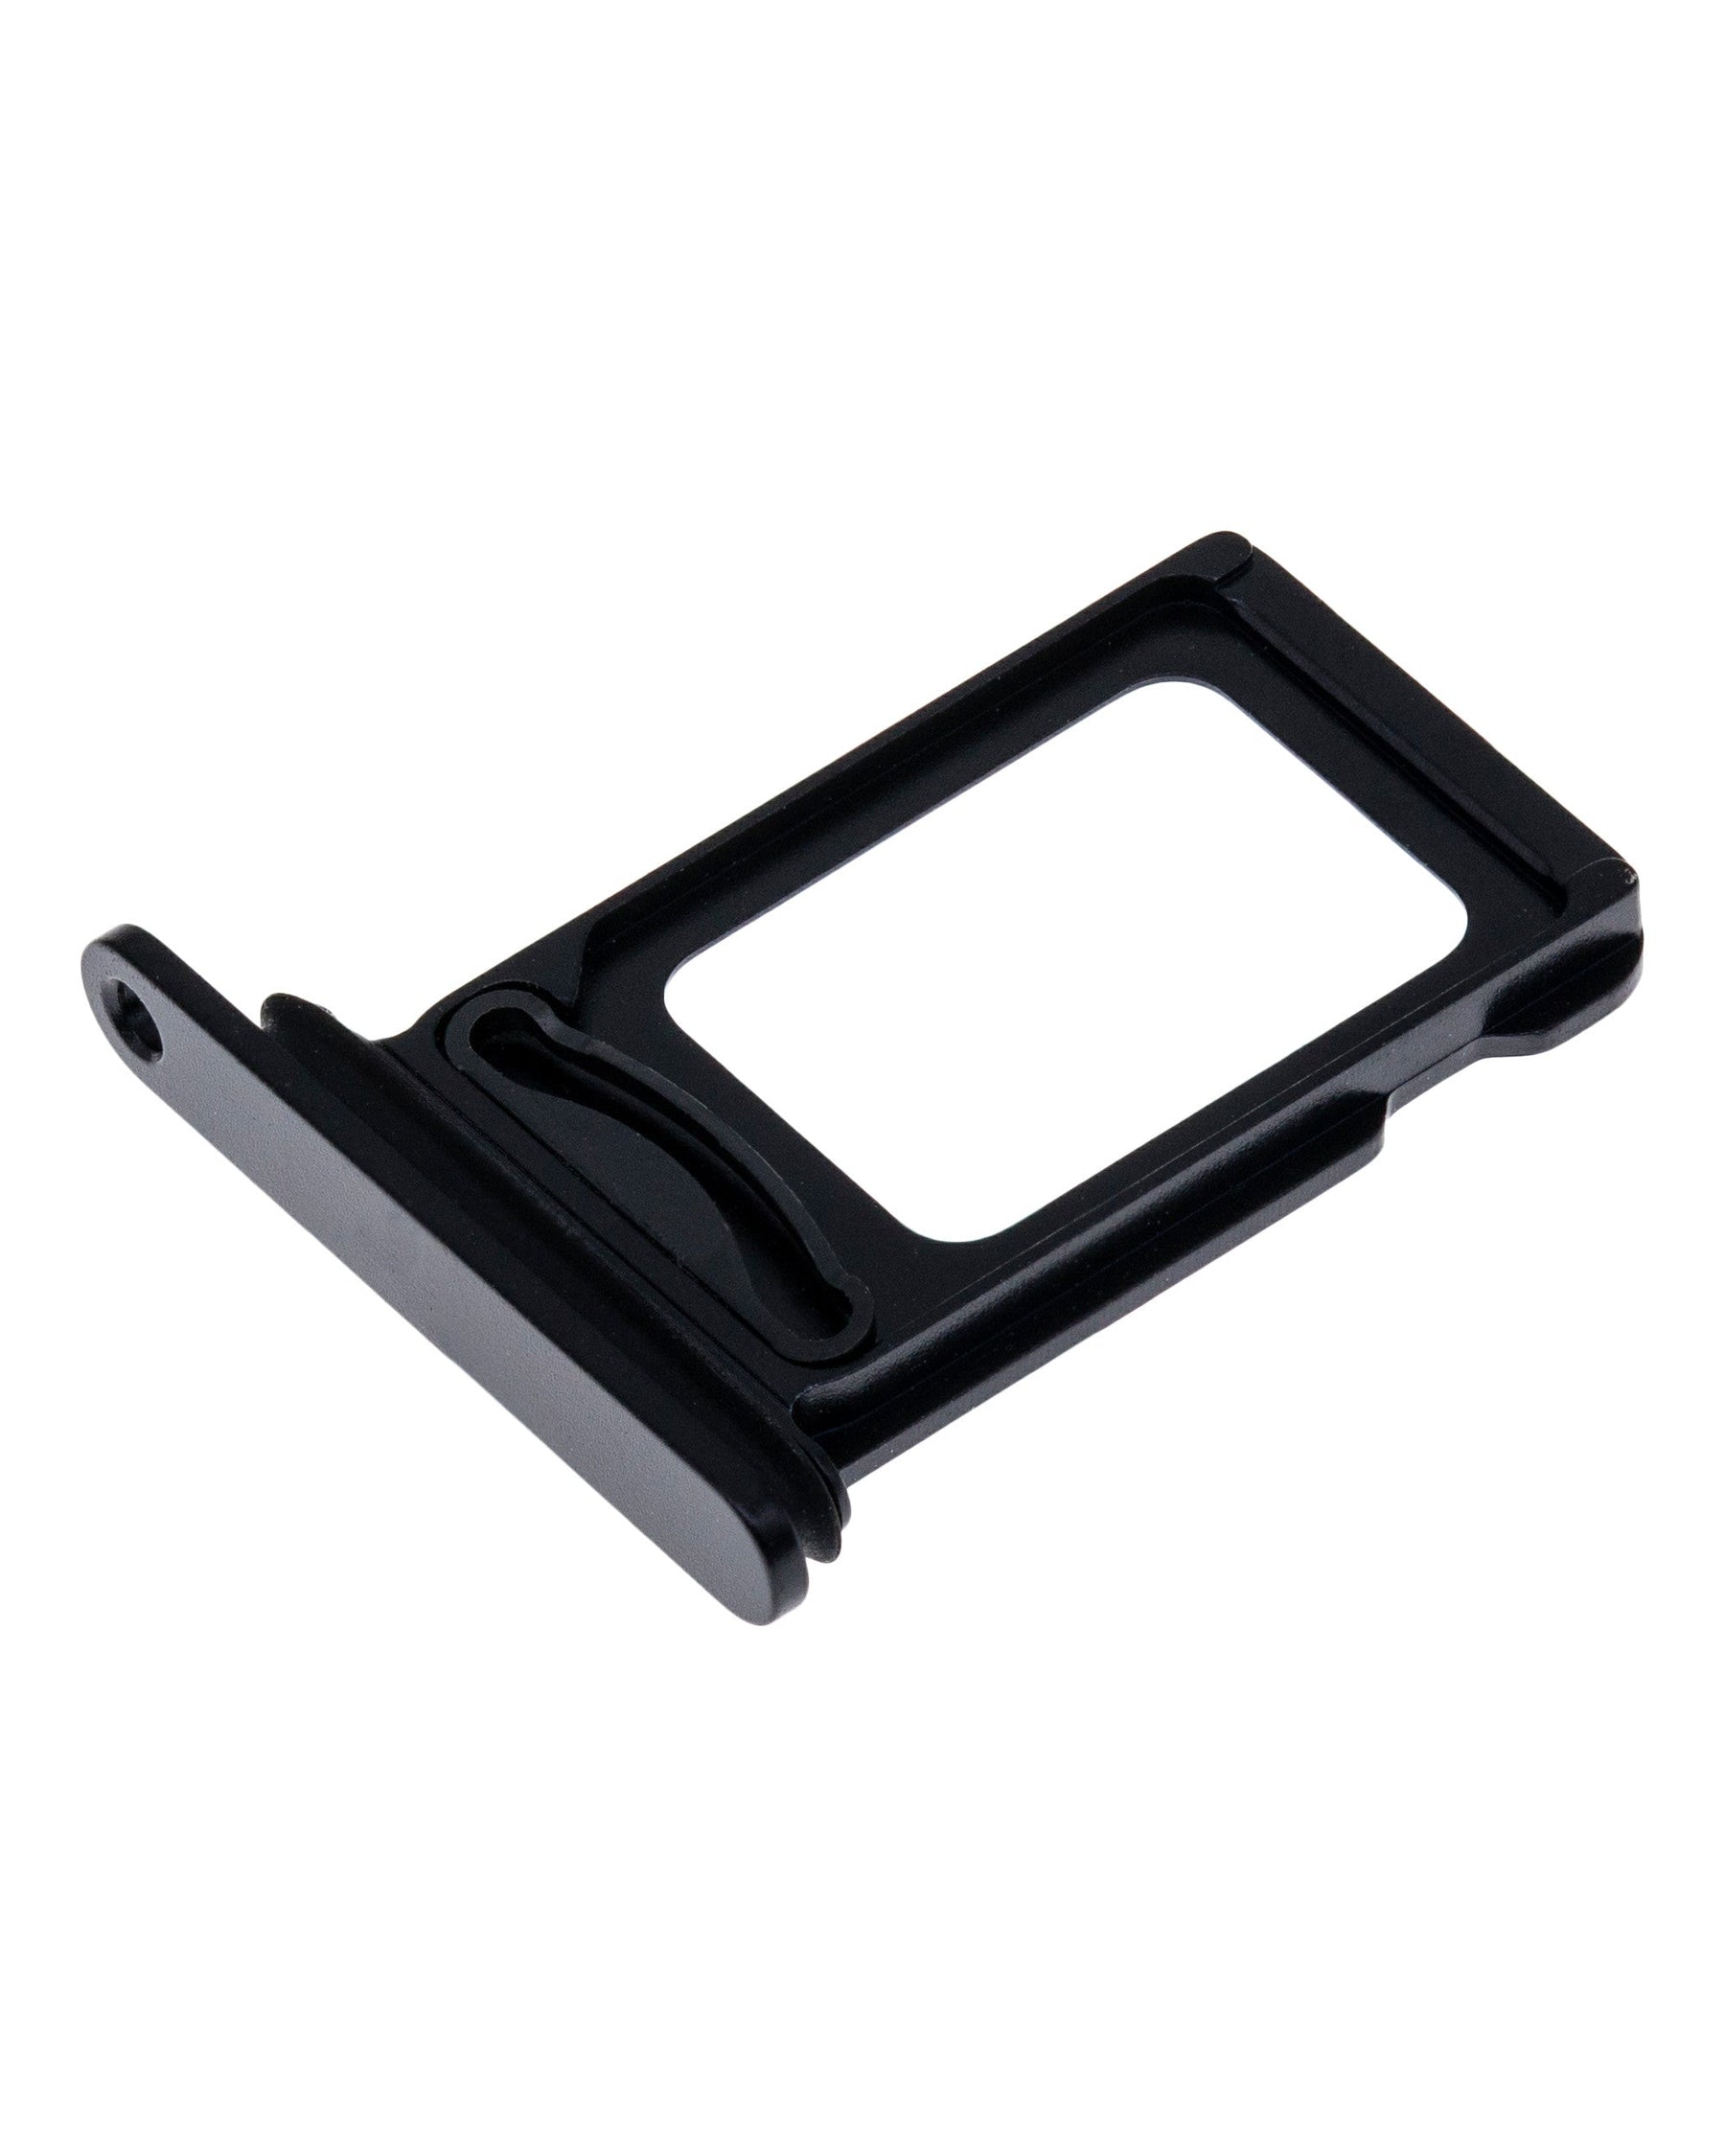 BLACK DUAL SIM CARD TRAY COMPATIBLE WITH IPHONE 12